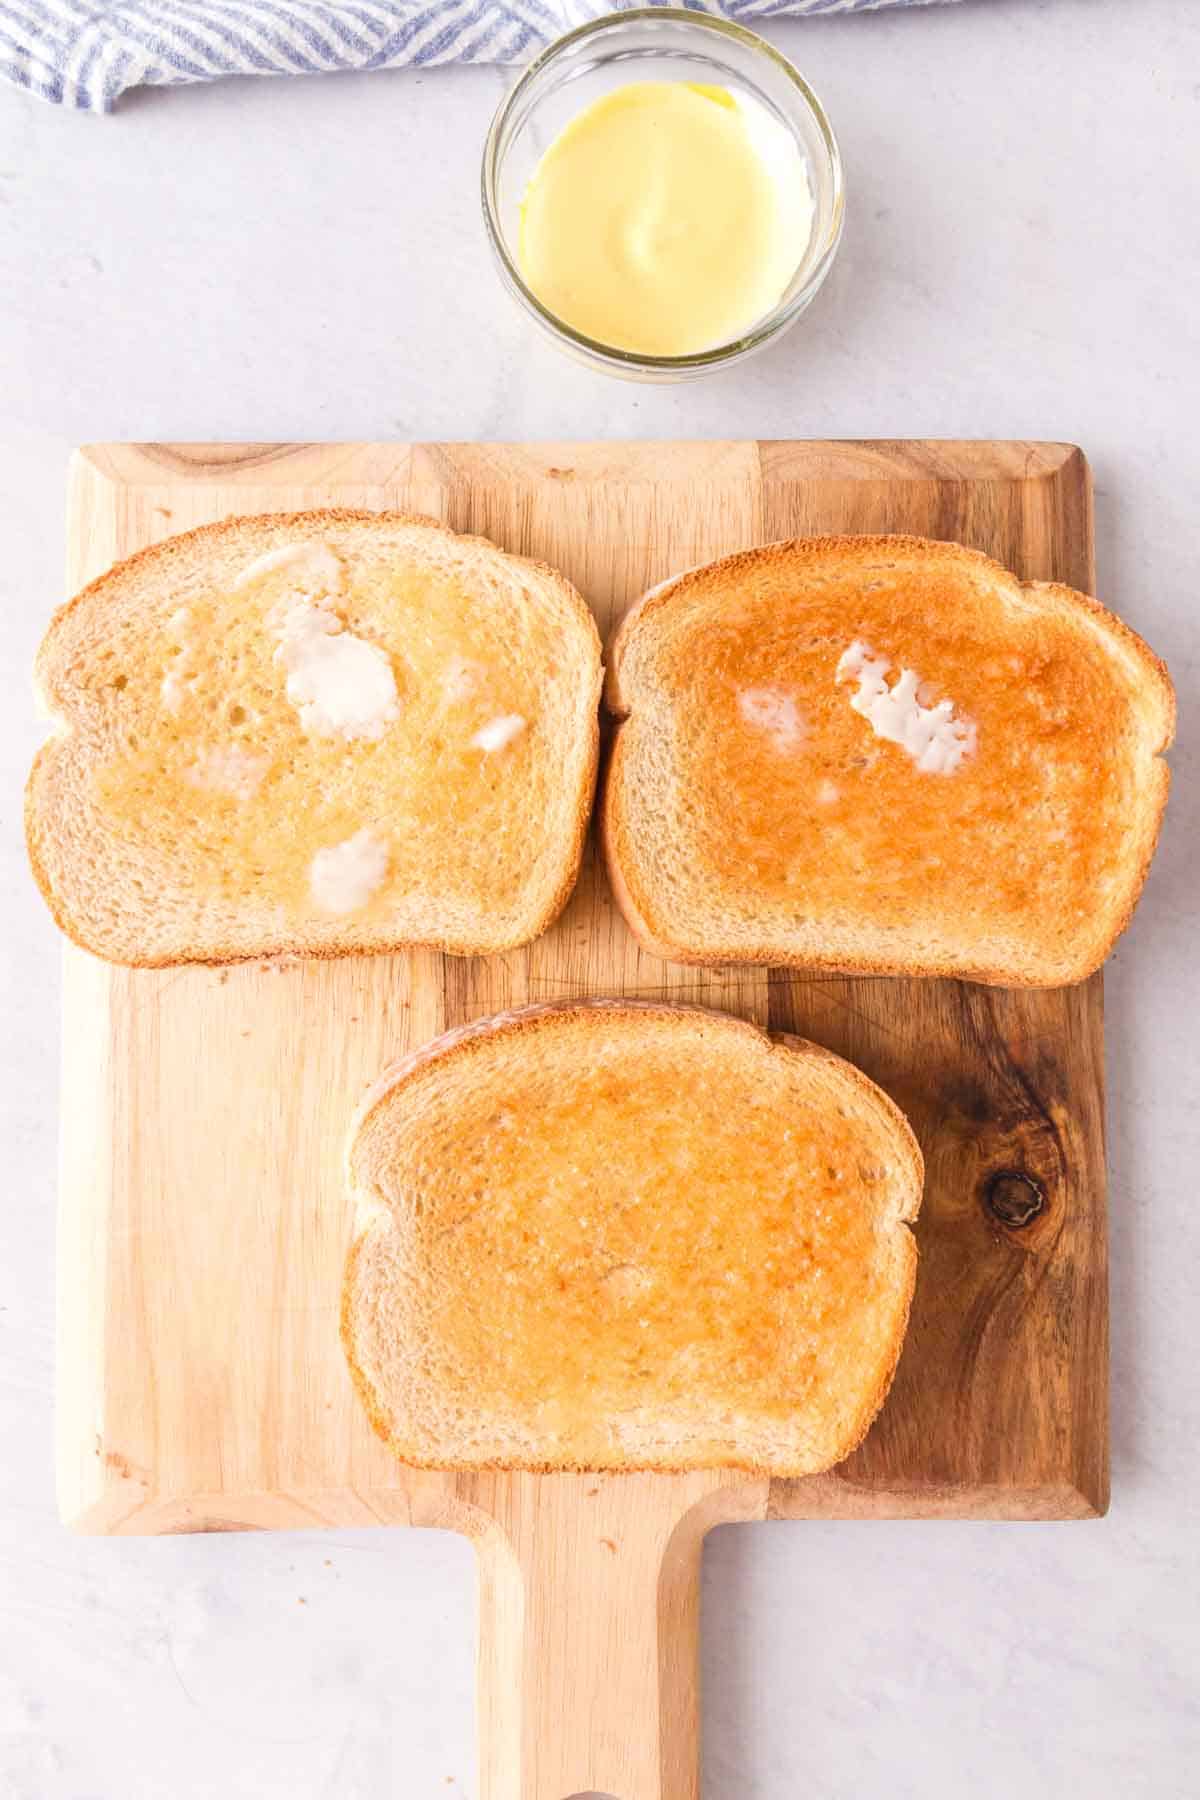 Toasted slices of bread on a cutting board.